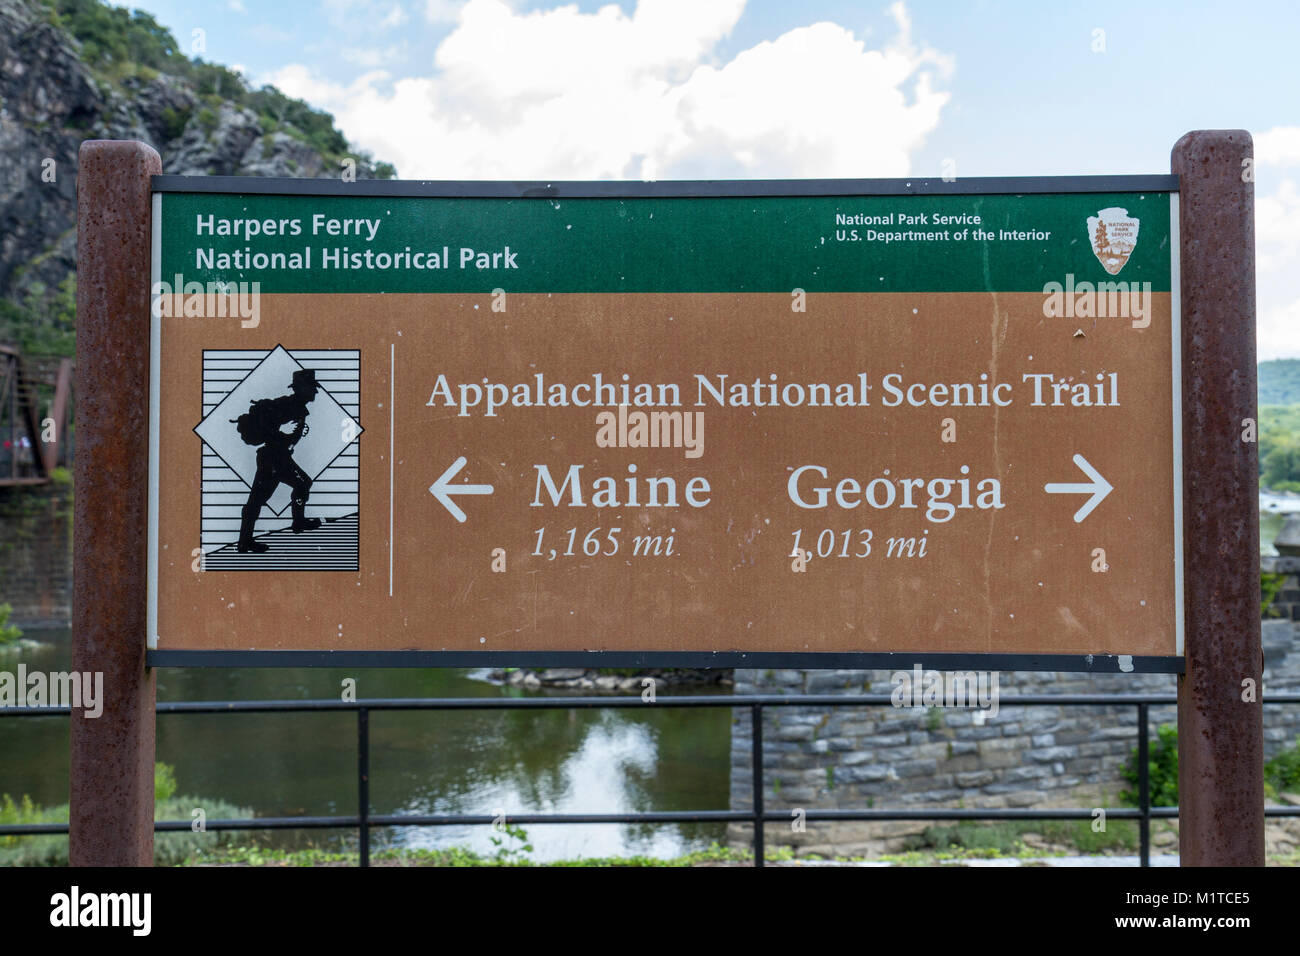 Appalachian National Scenic Trail National Park Service sign in Harpers Ferry, West Virginia, United States. Stock Photo